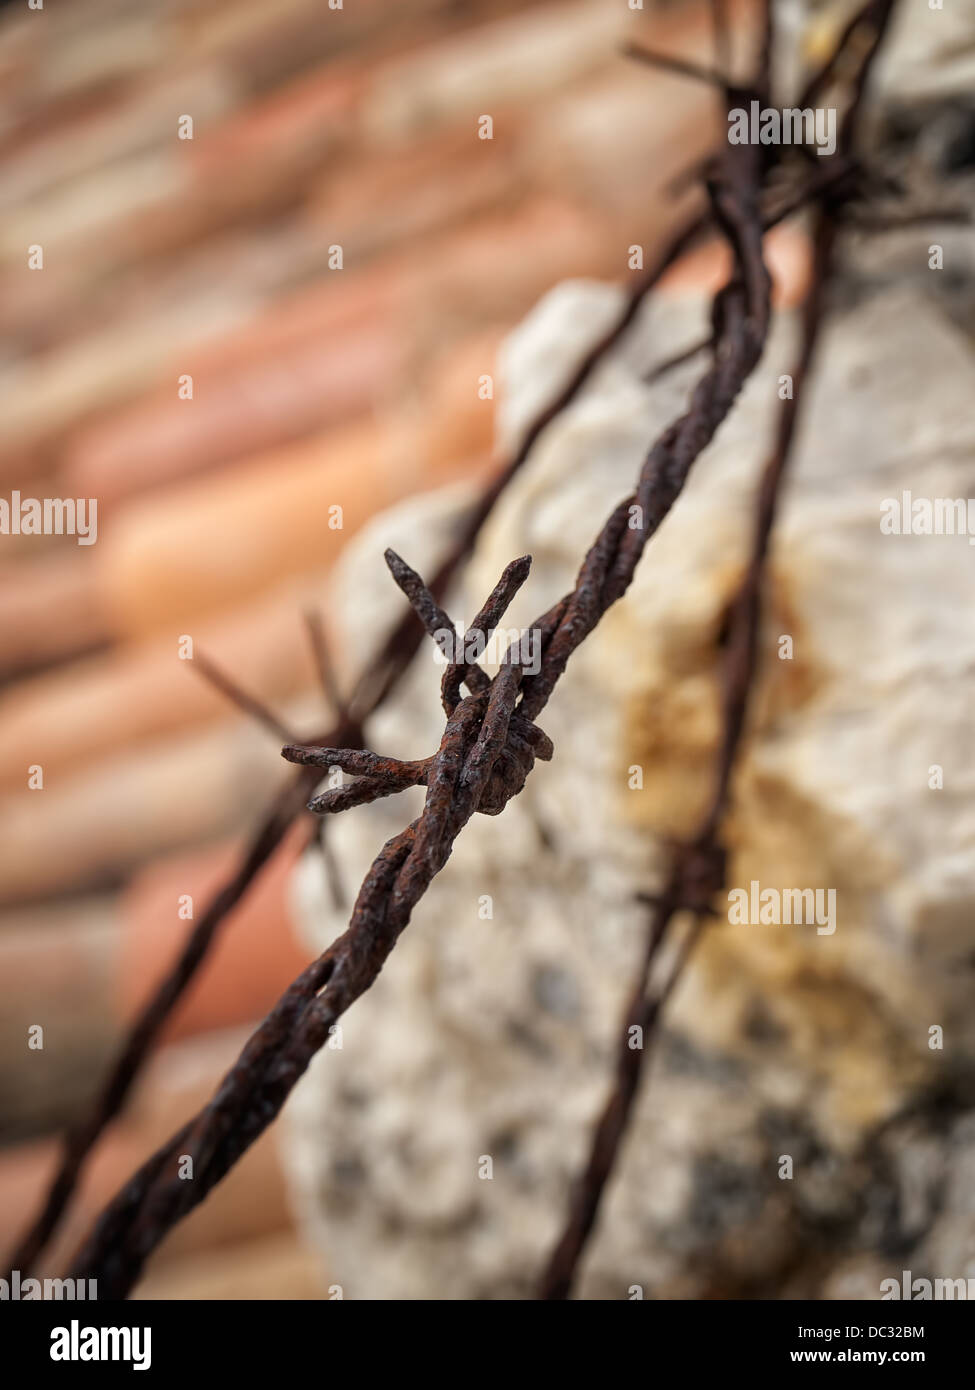 Rusty barbed wire above roof and stone wall. Stock Photo